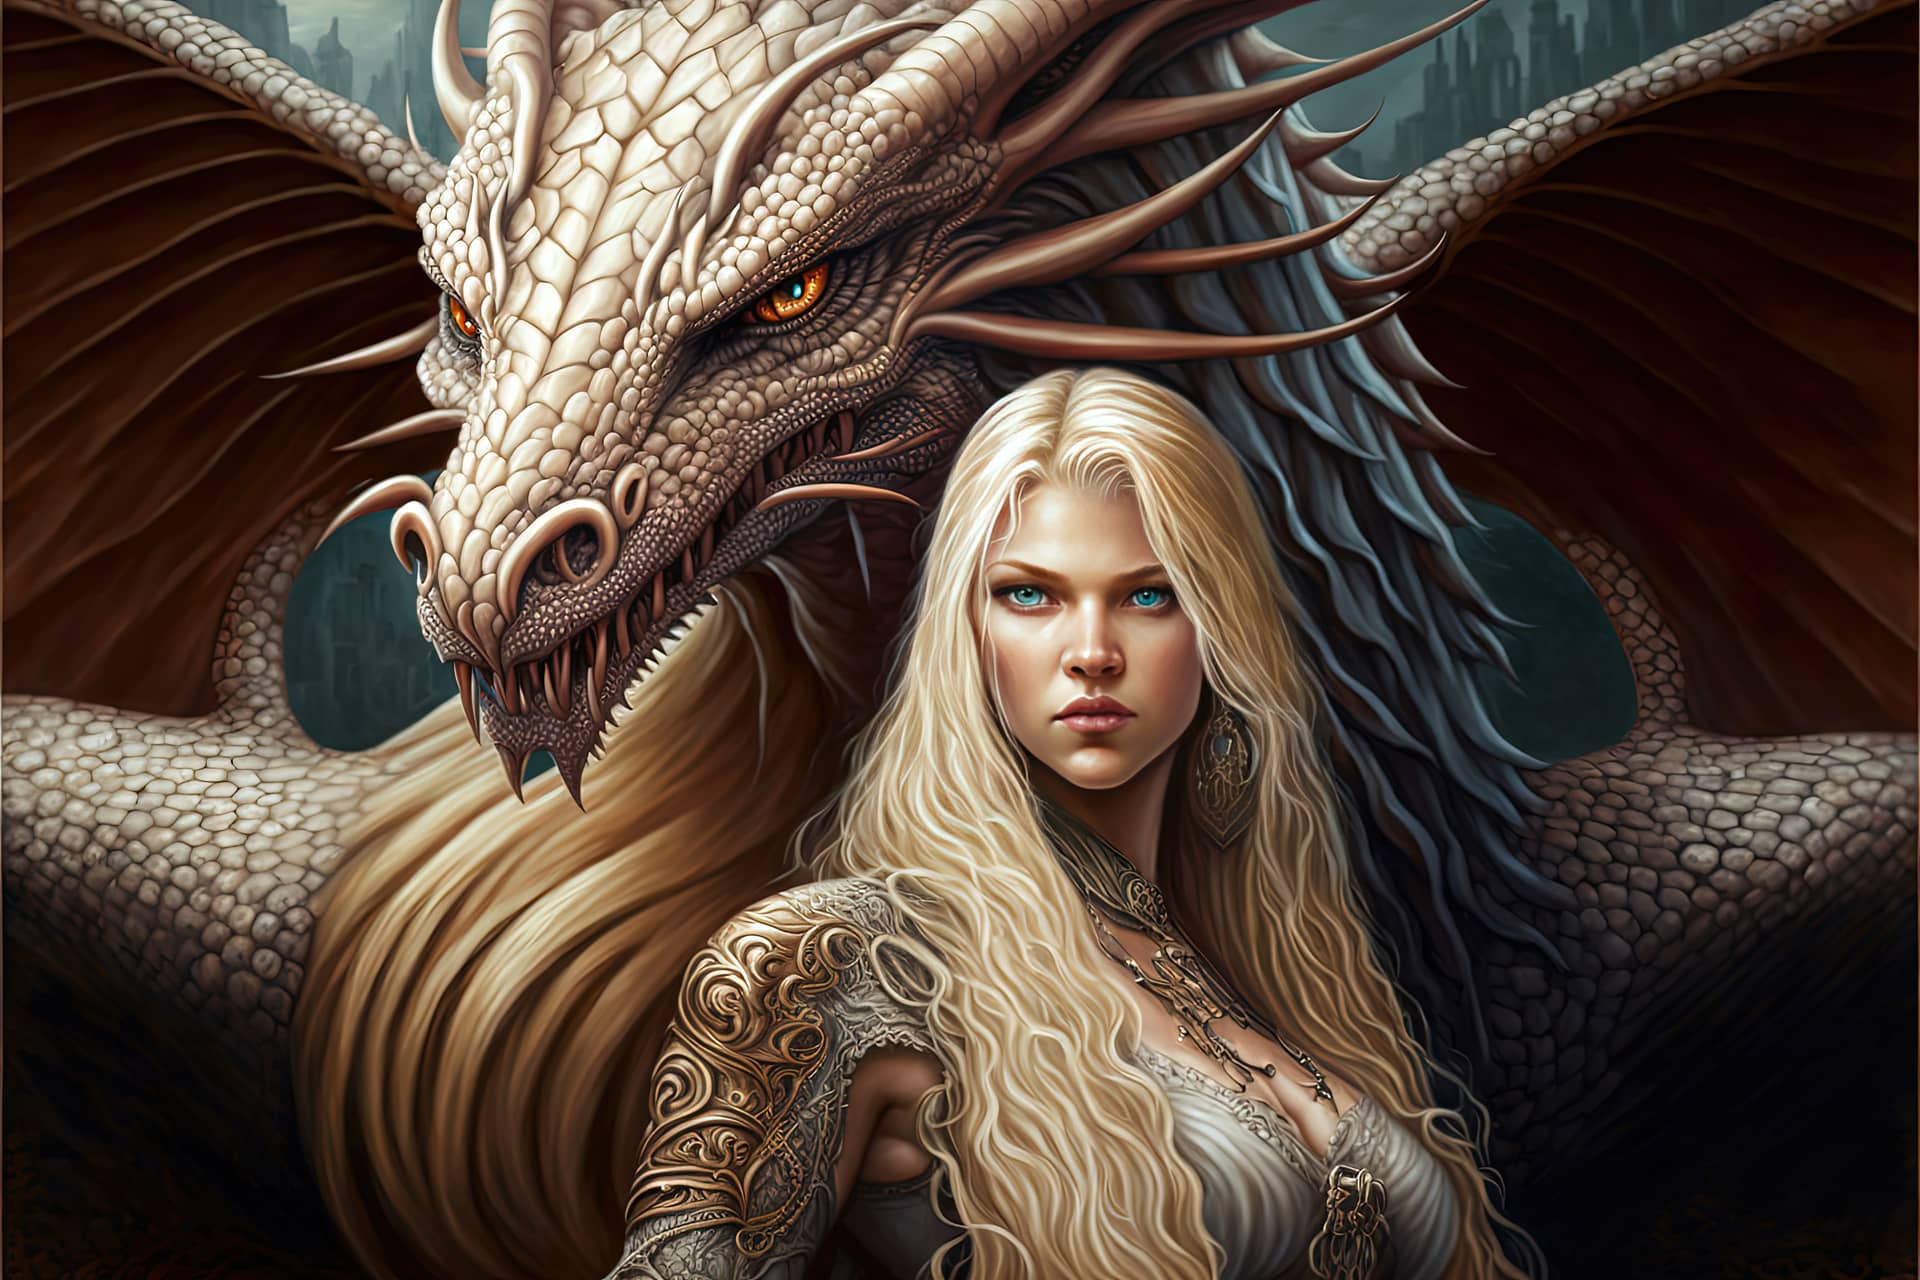 Cool images for profile with blond hair her dragon pet creature